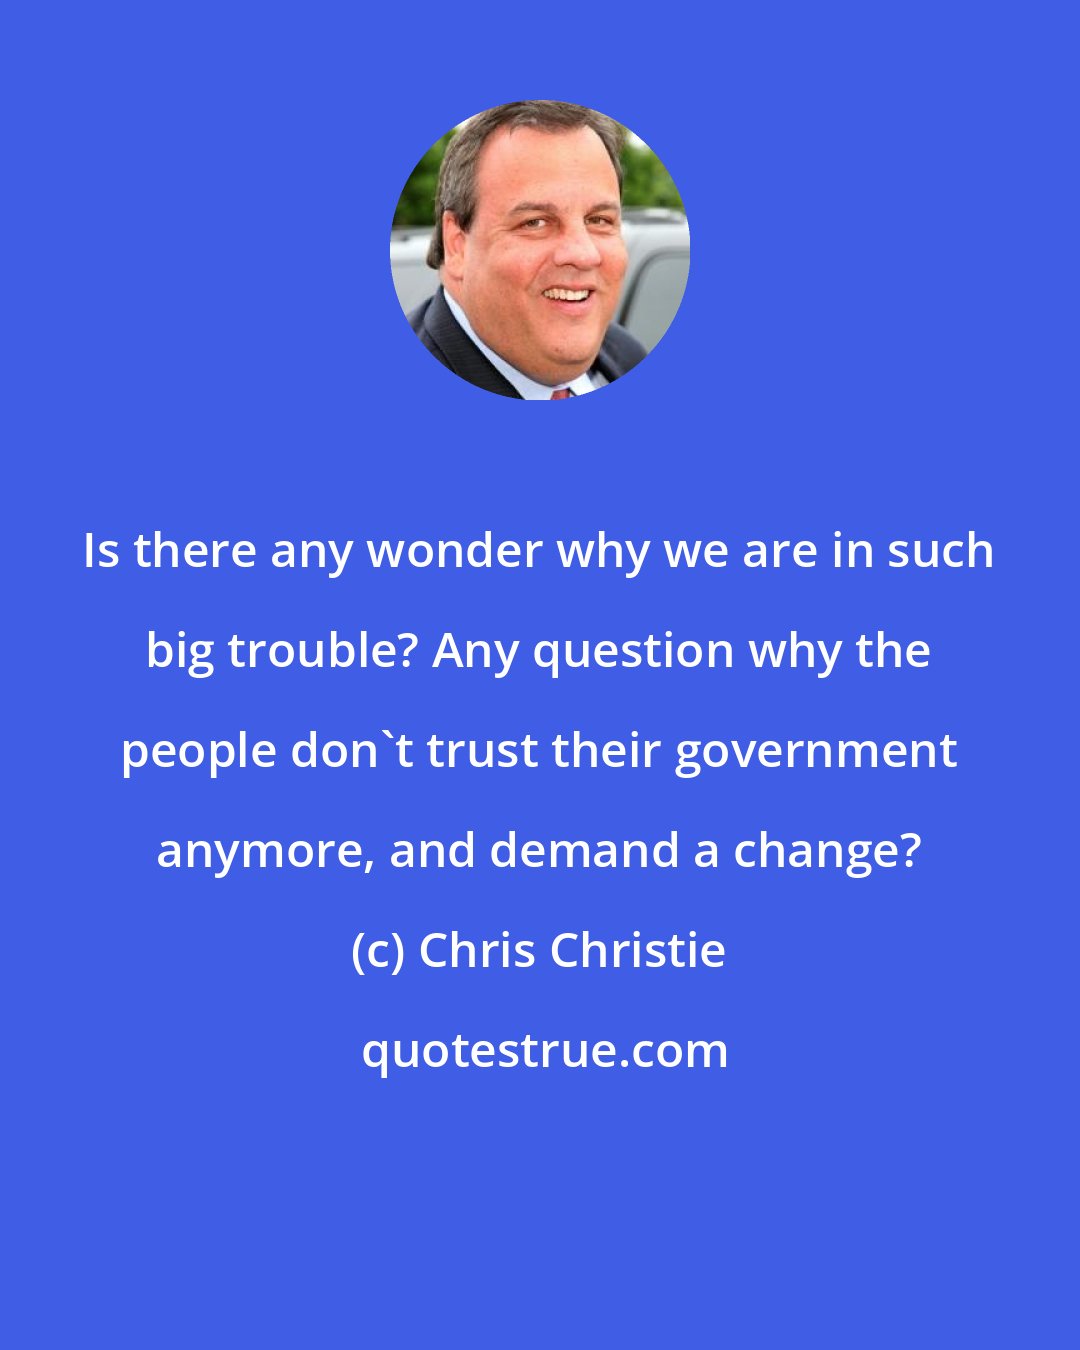 Chris Christie: Is there any wonder why we are in such big trouble? Any question why the people don't trust their government anymore, and demand a change?